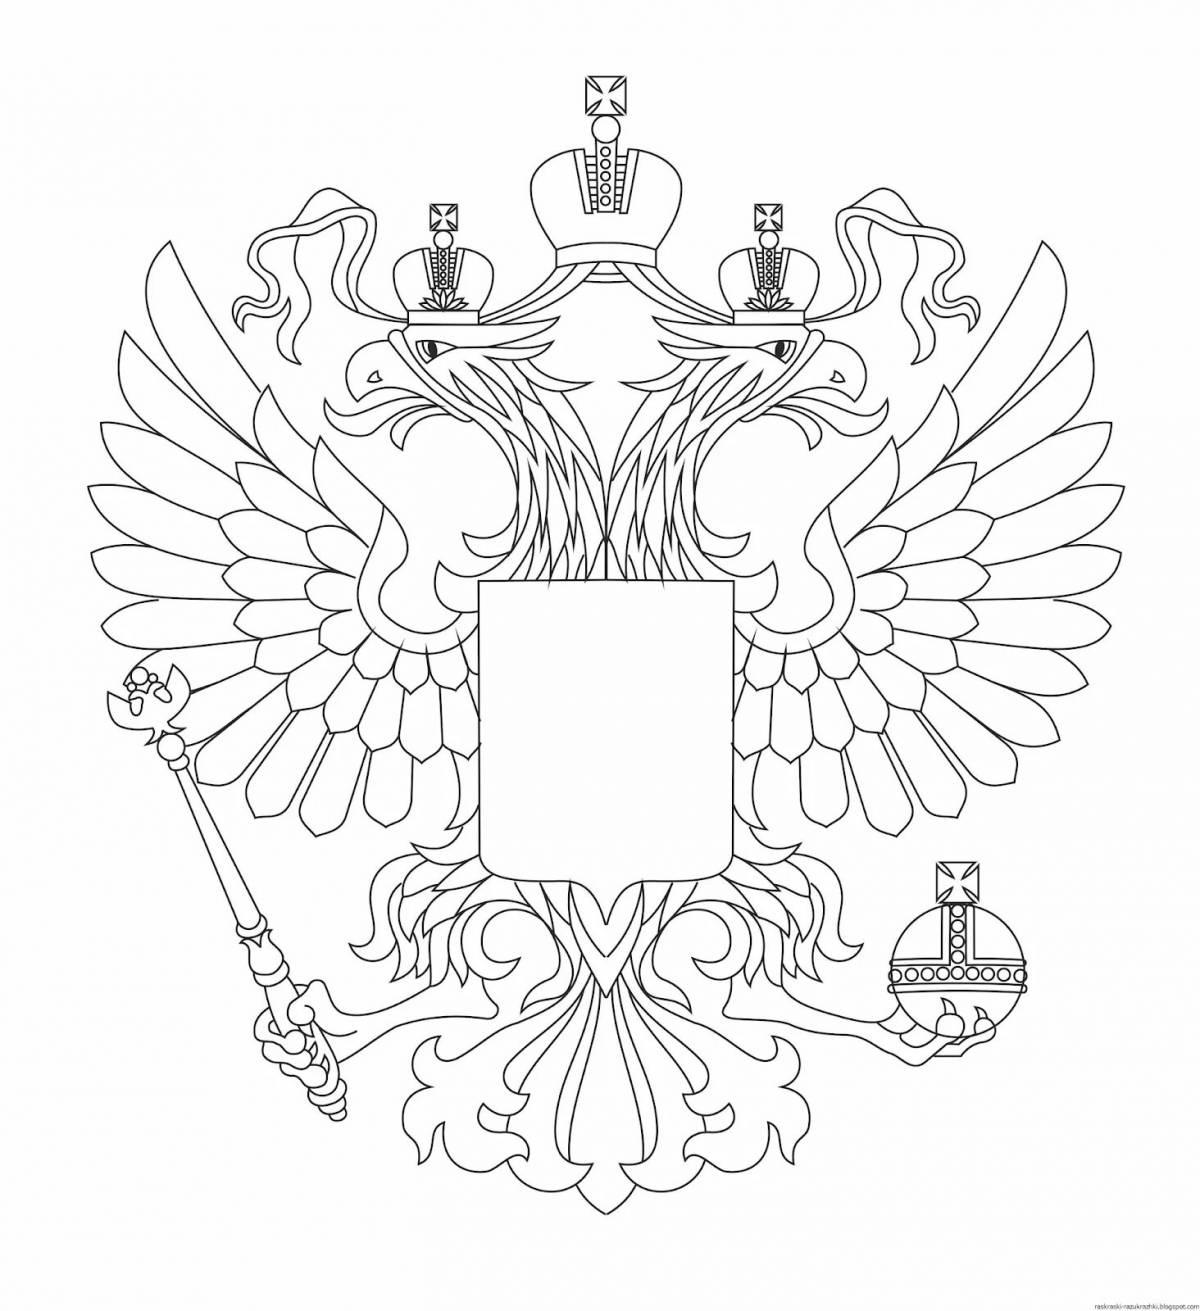 Colouring page enticing russian constitution for kids